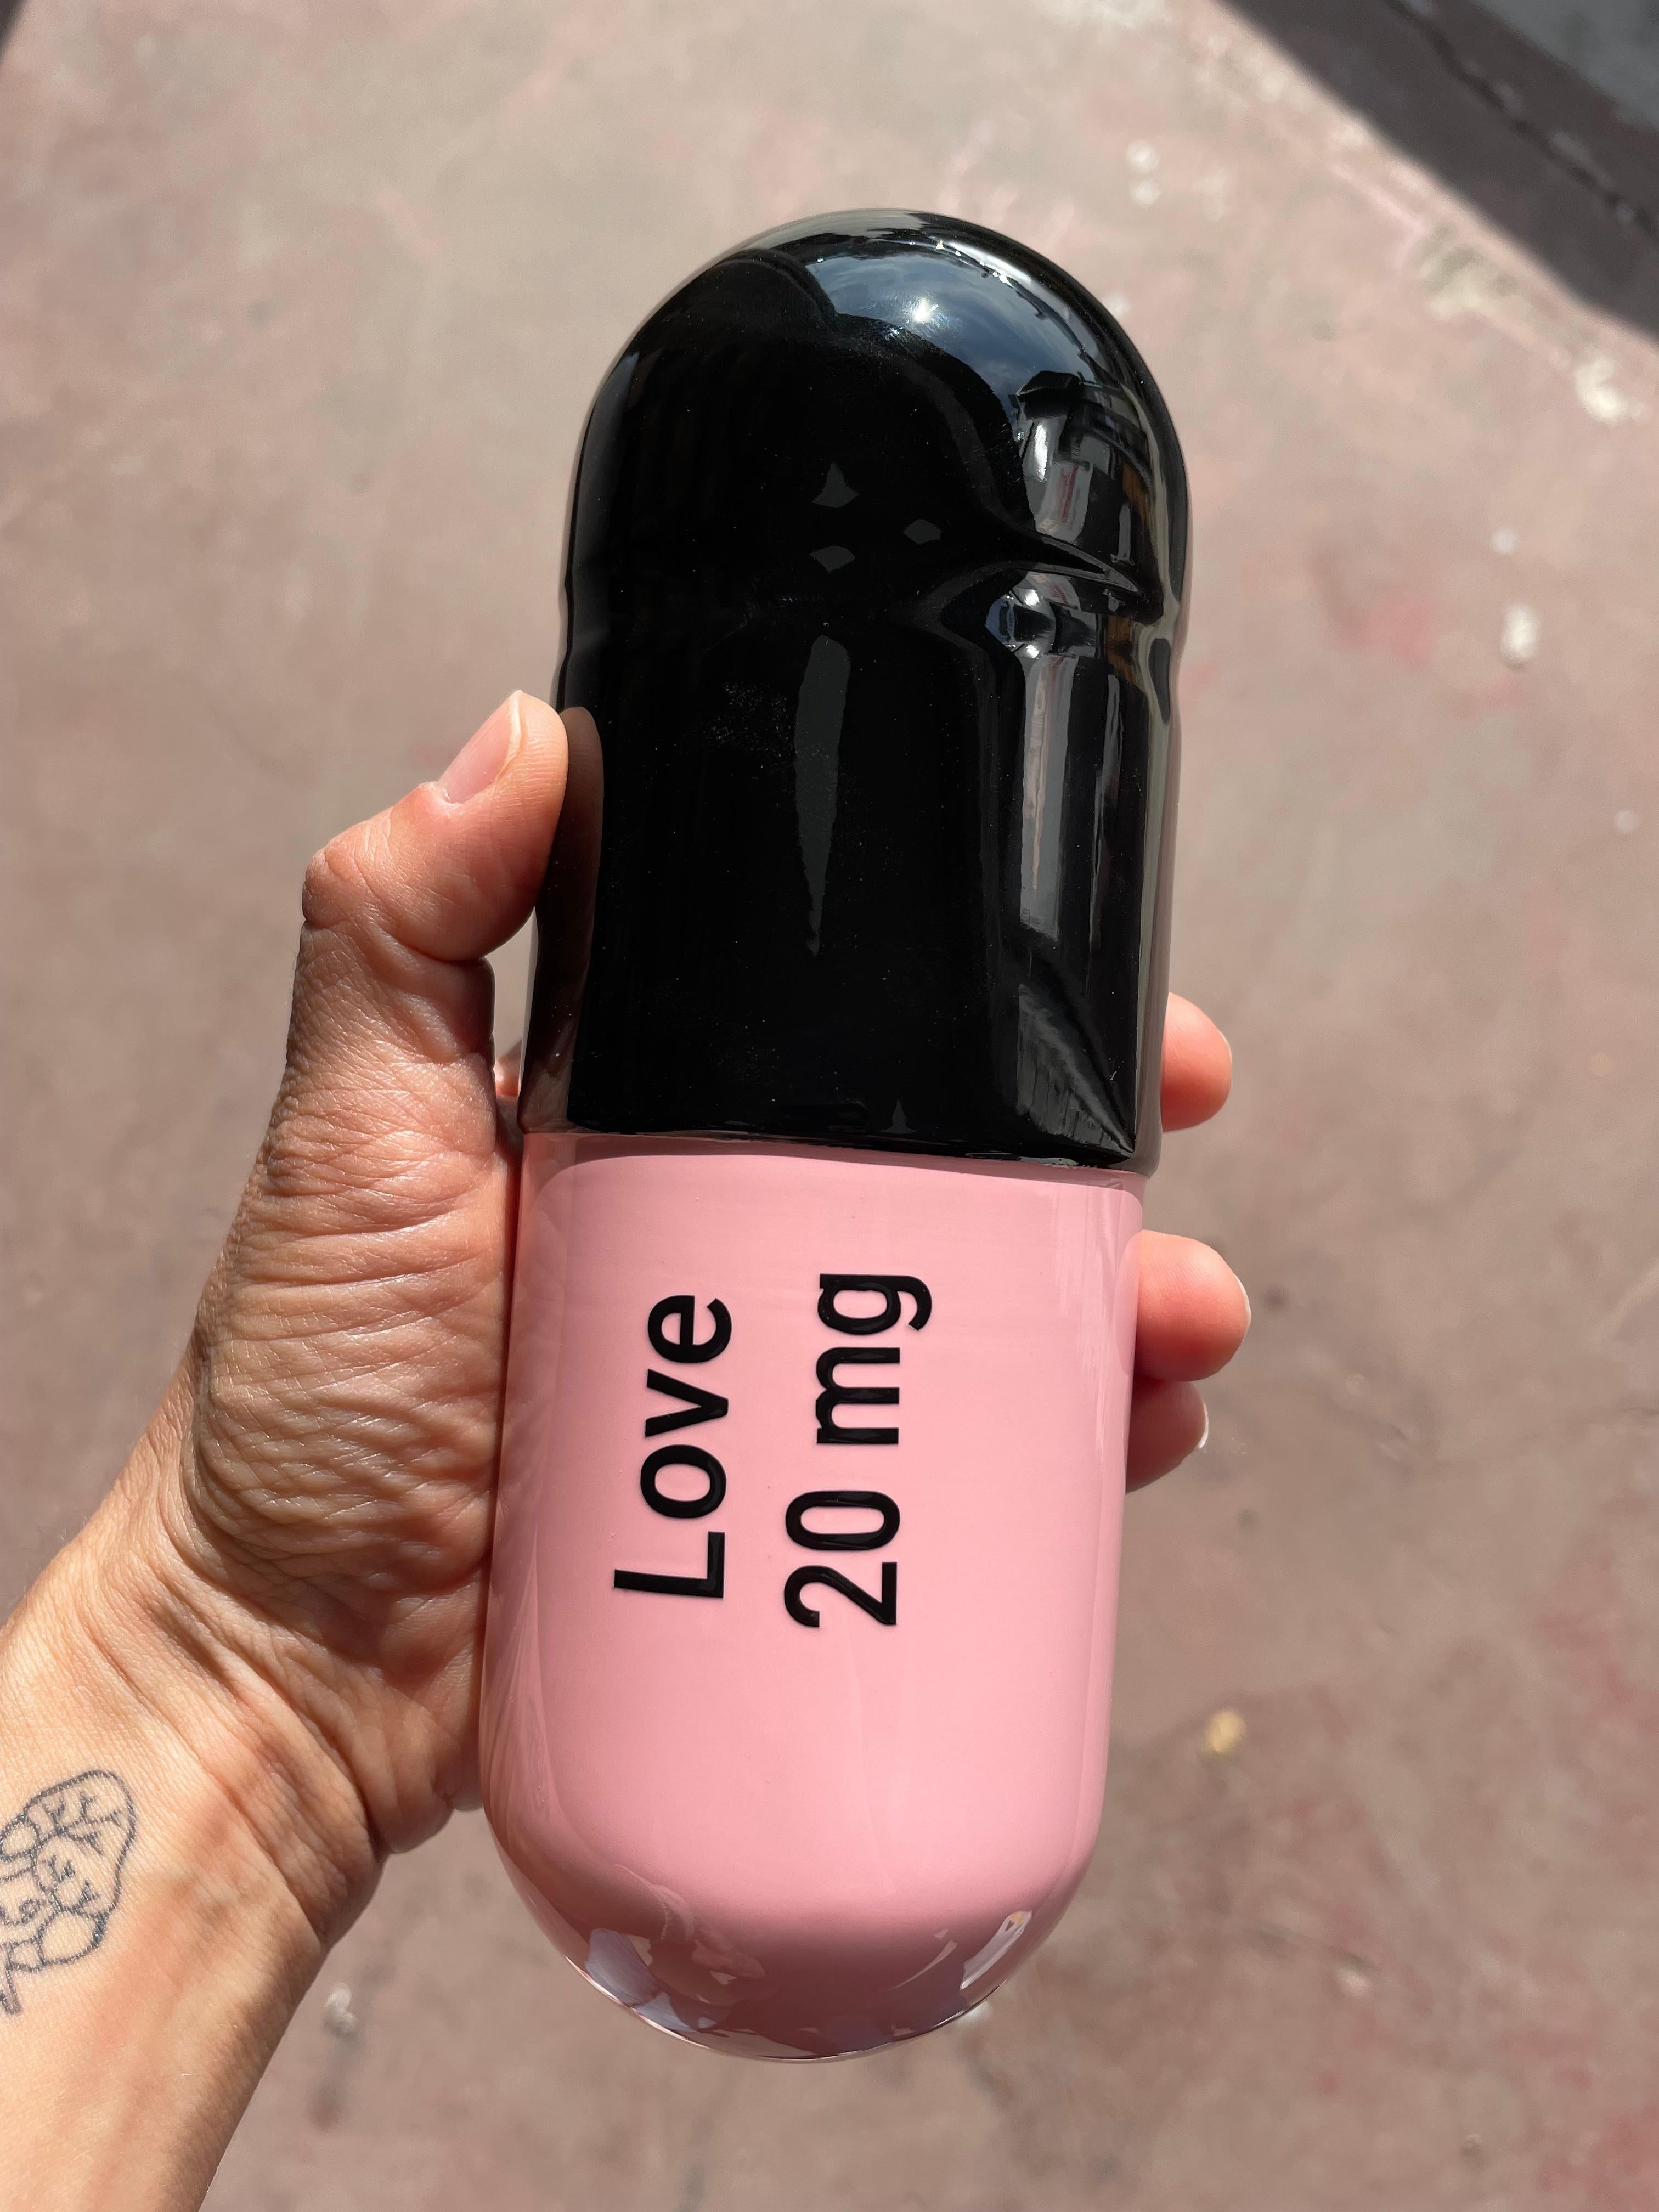 20 ml Love pill (black and pink) - figurative pop sculpture - Sculpture by Tal Nehoray